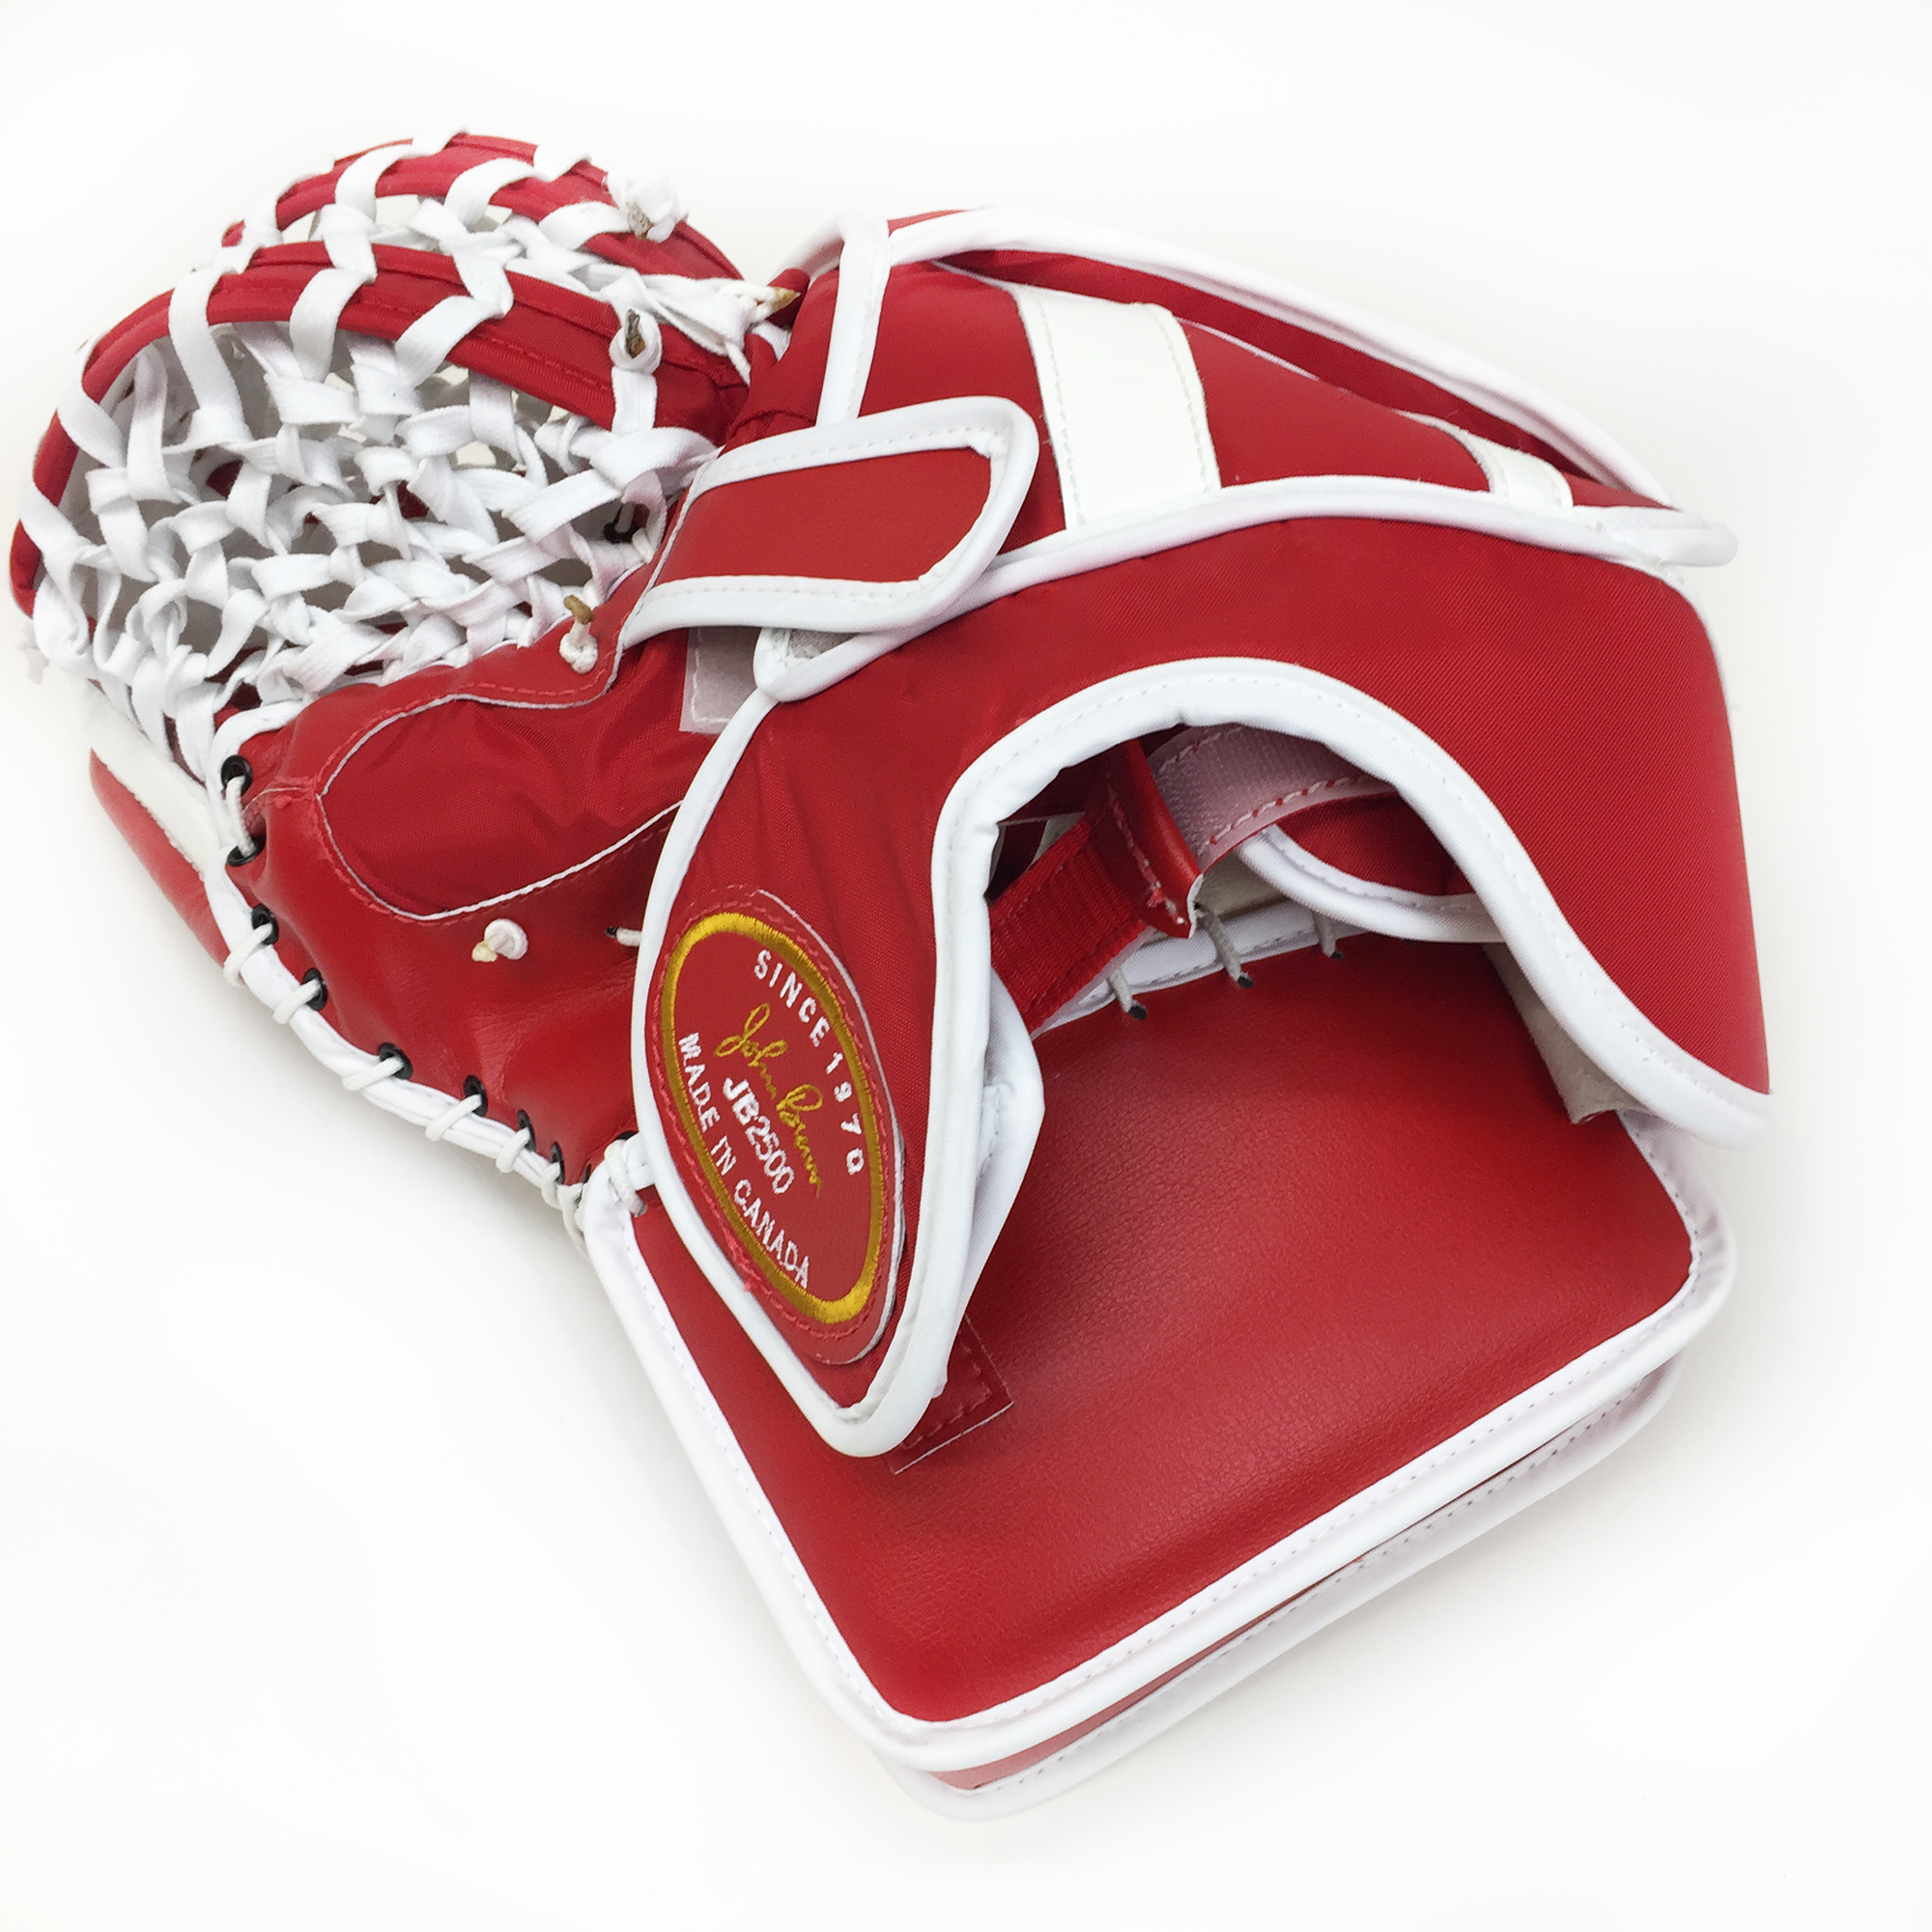 Rear wrist of 2500 catch glove in red and white